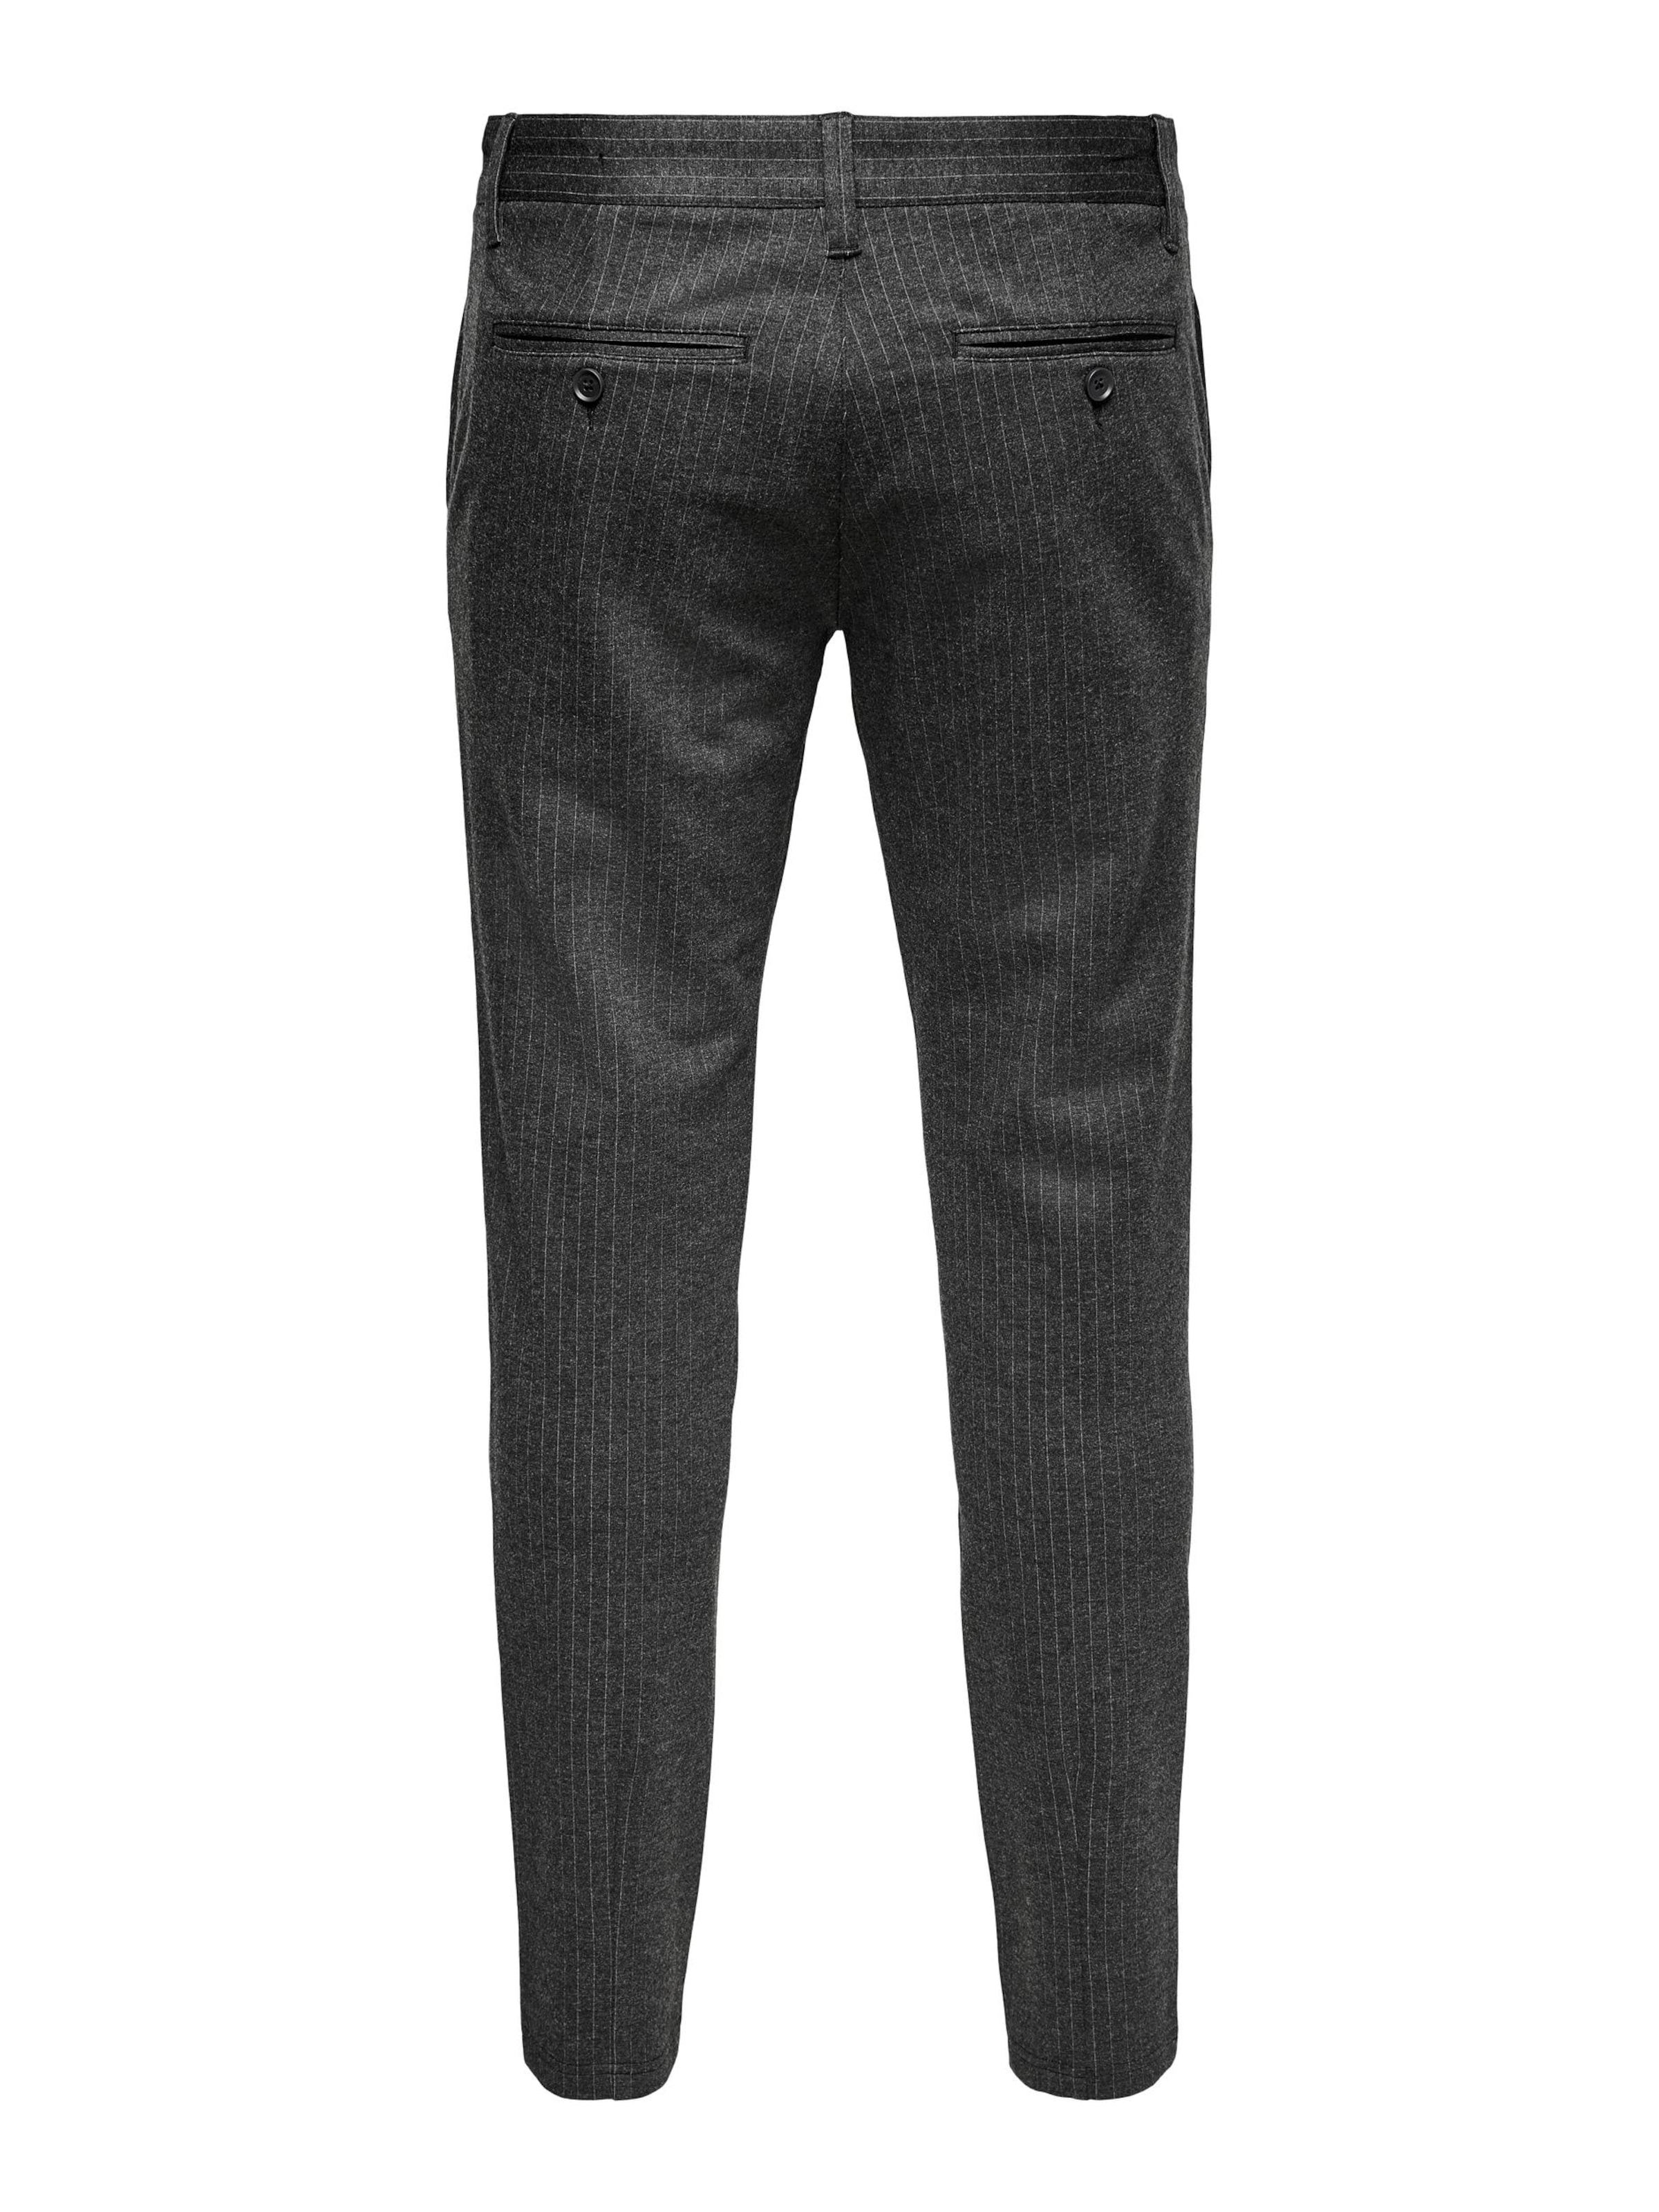 Occasions spéciales Pantalon chino Mark Only & Sons en Gris Chiné 